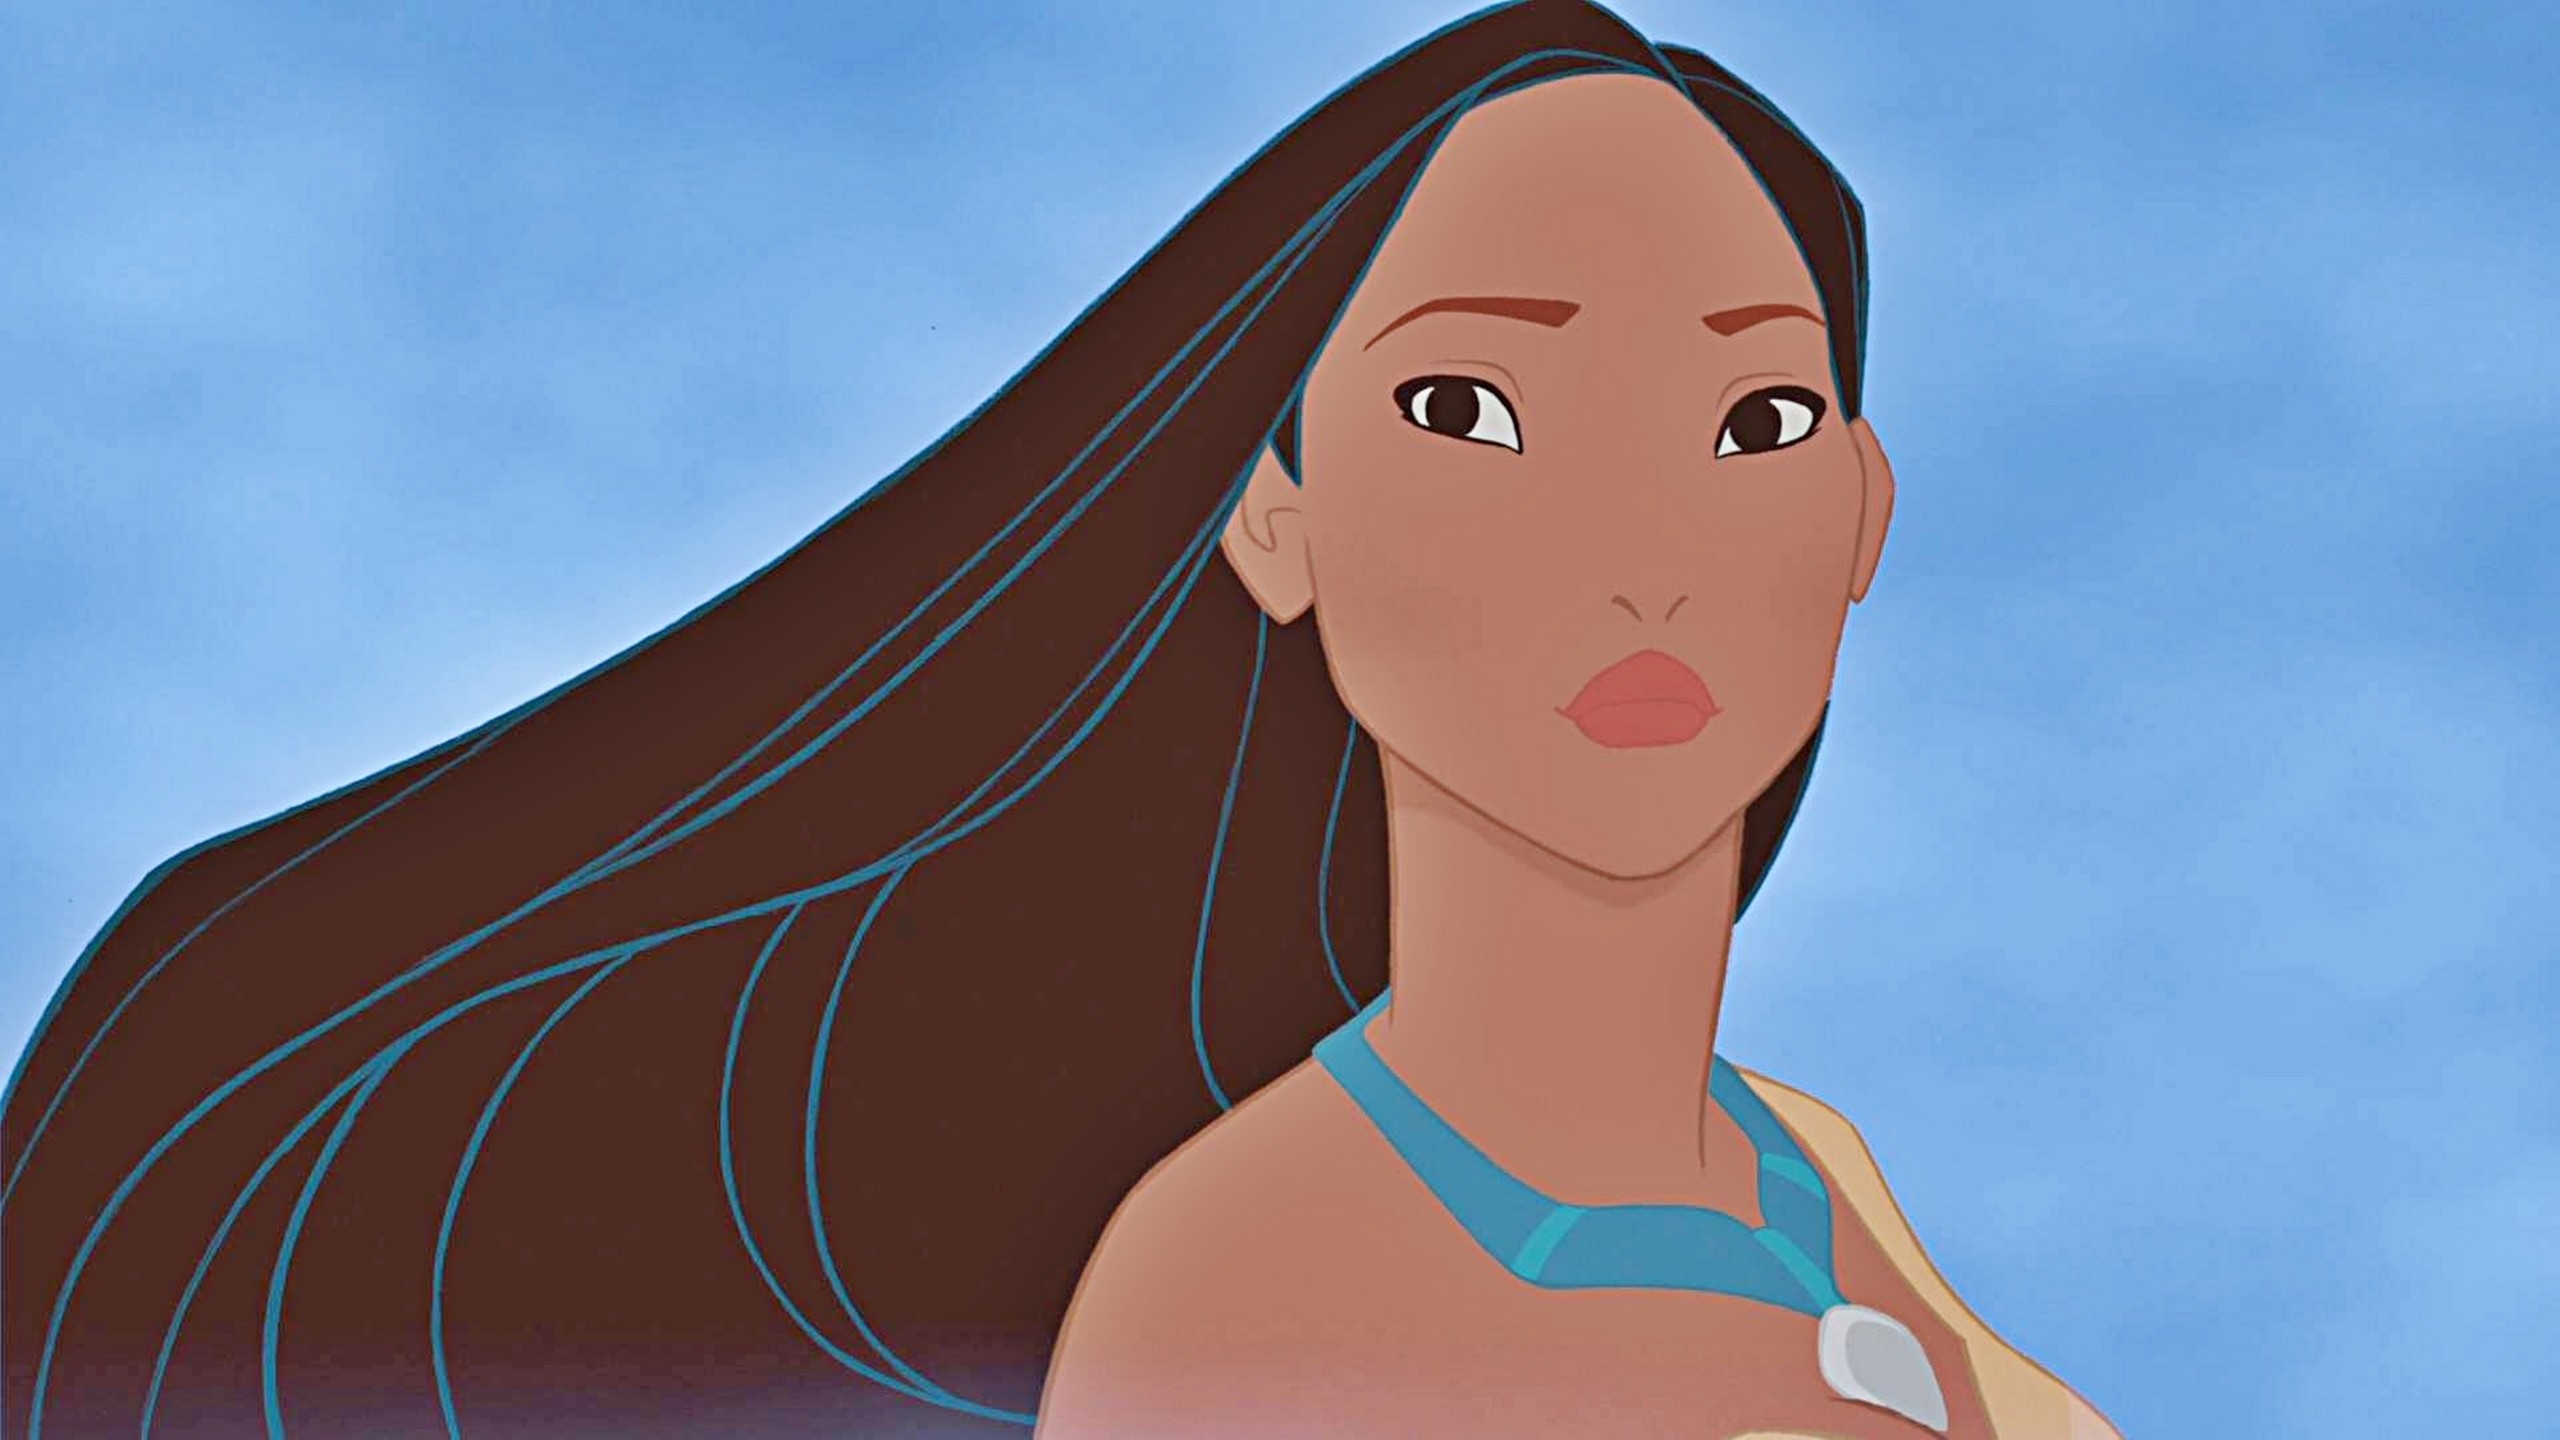 2560x1440 Belle and Pocahontas images Pocahontas HD wallpaper and background photos